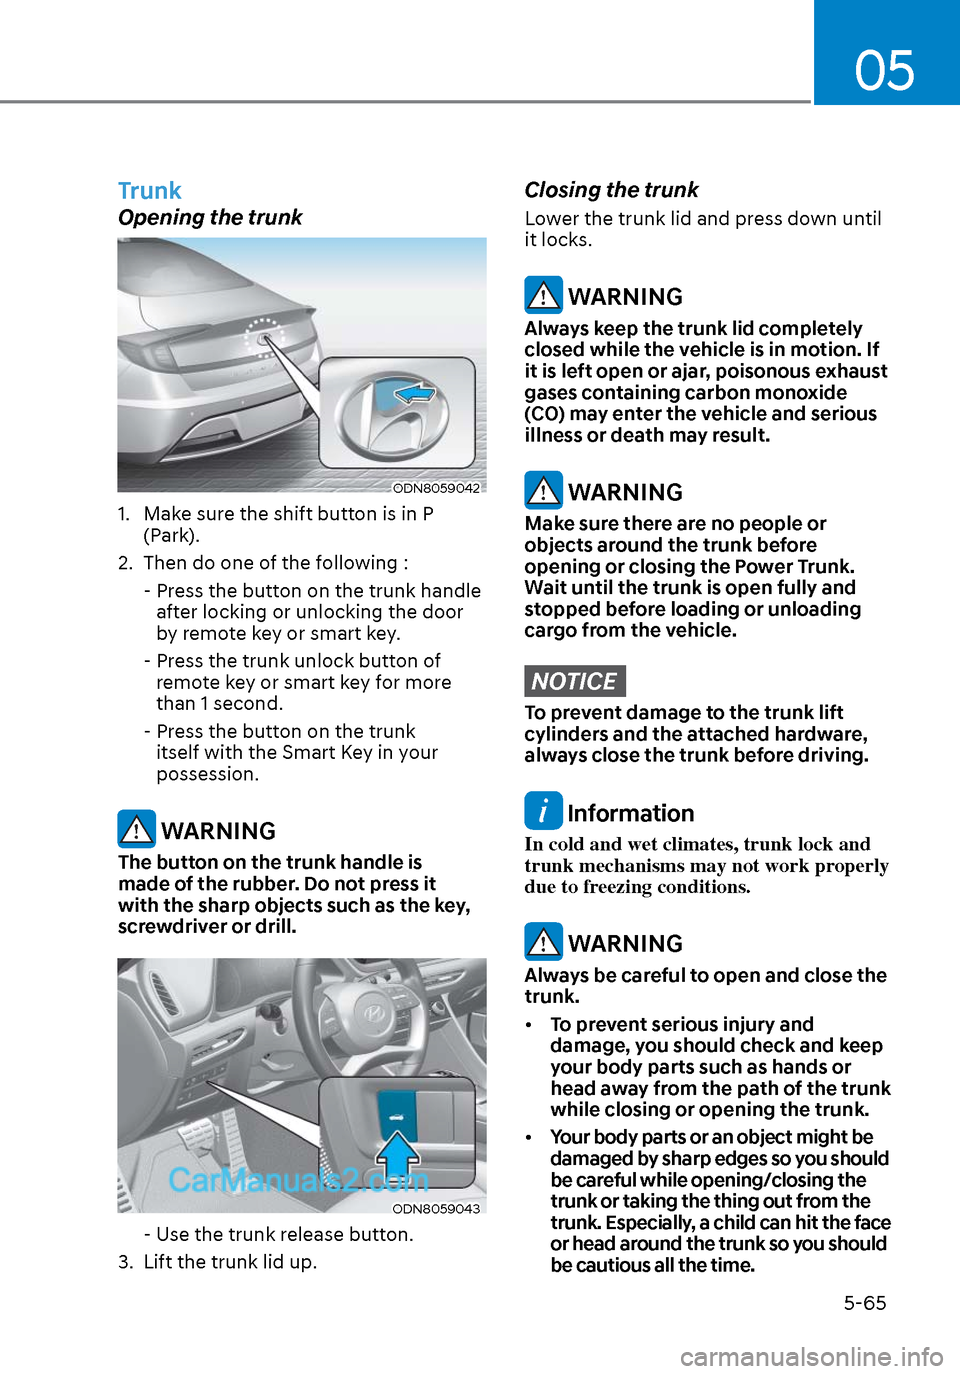 Hyundai Sonata 2020  Owners Manual 05
5-65
Trunk
Opening the trunk
ODN8059042ODN8059042
1.  Make sure the shift button is in P (Park).
2.  Then do one of the following :
  -  Press the button on the trunk handle  after locking or unloc